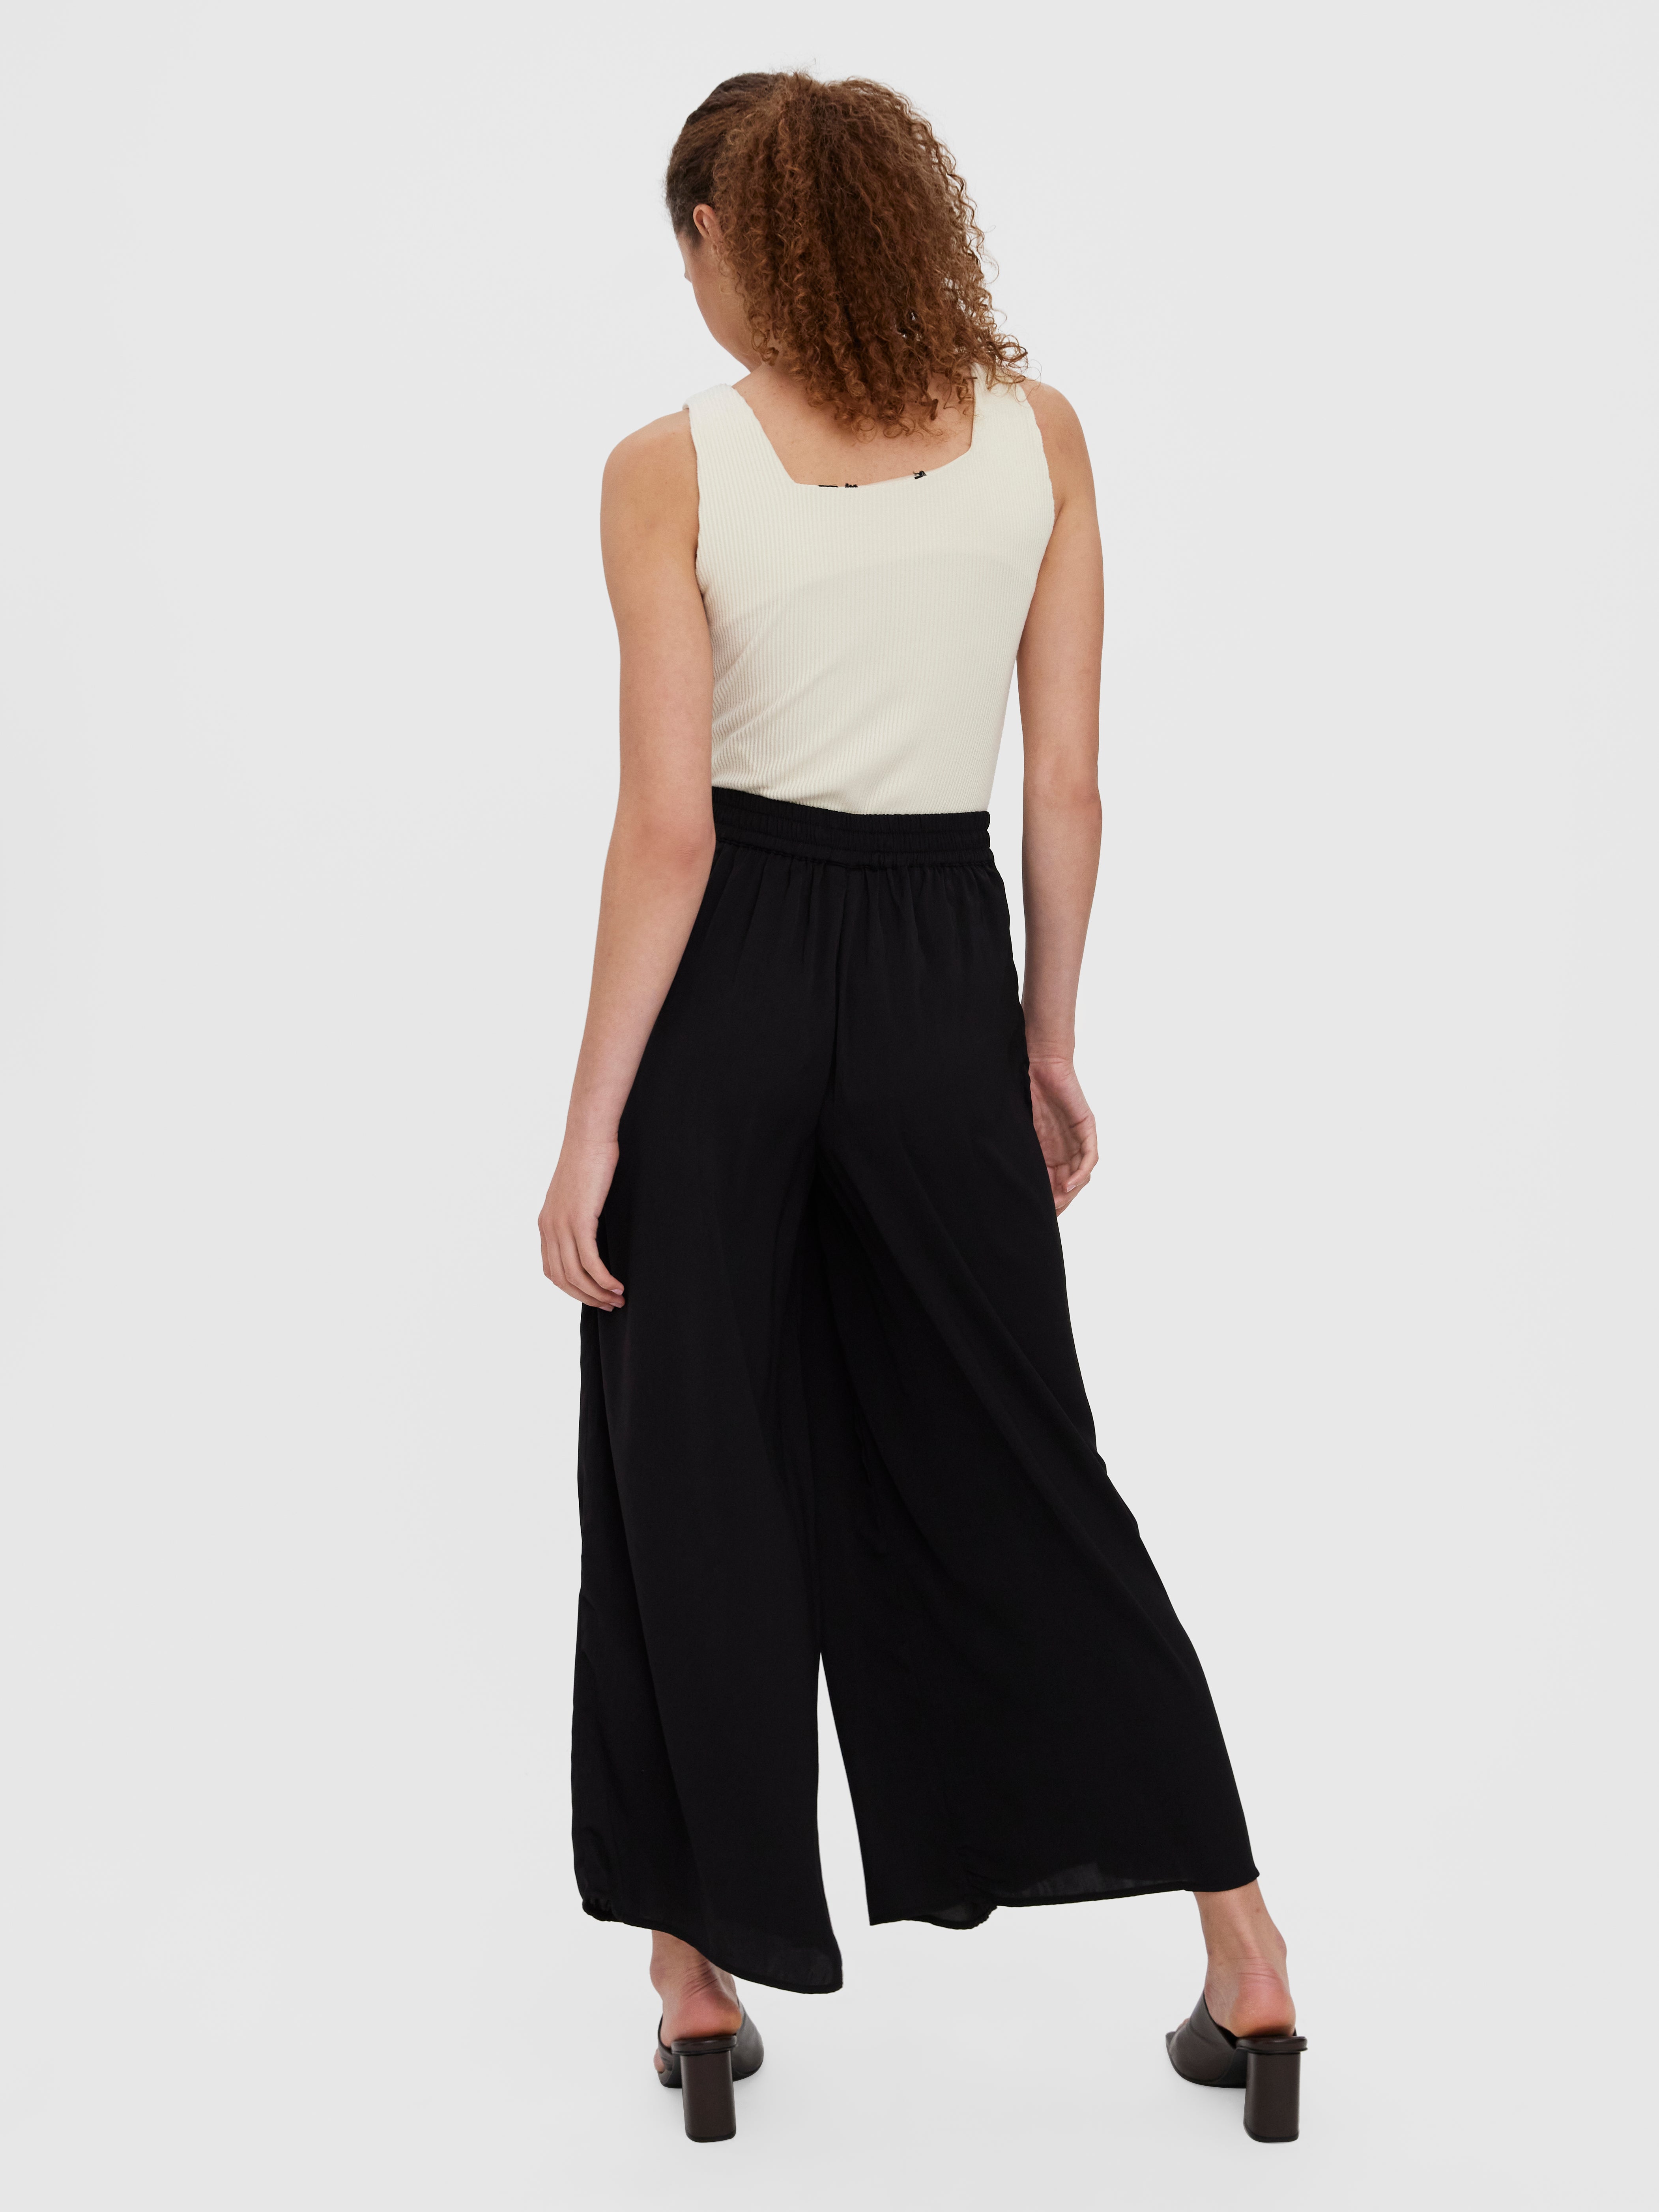 VERO MODA Relaxed fit trousers outlet  1800 products on sale   FASHIOLAcouk